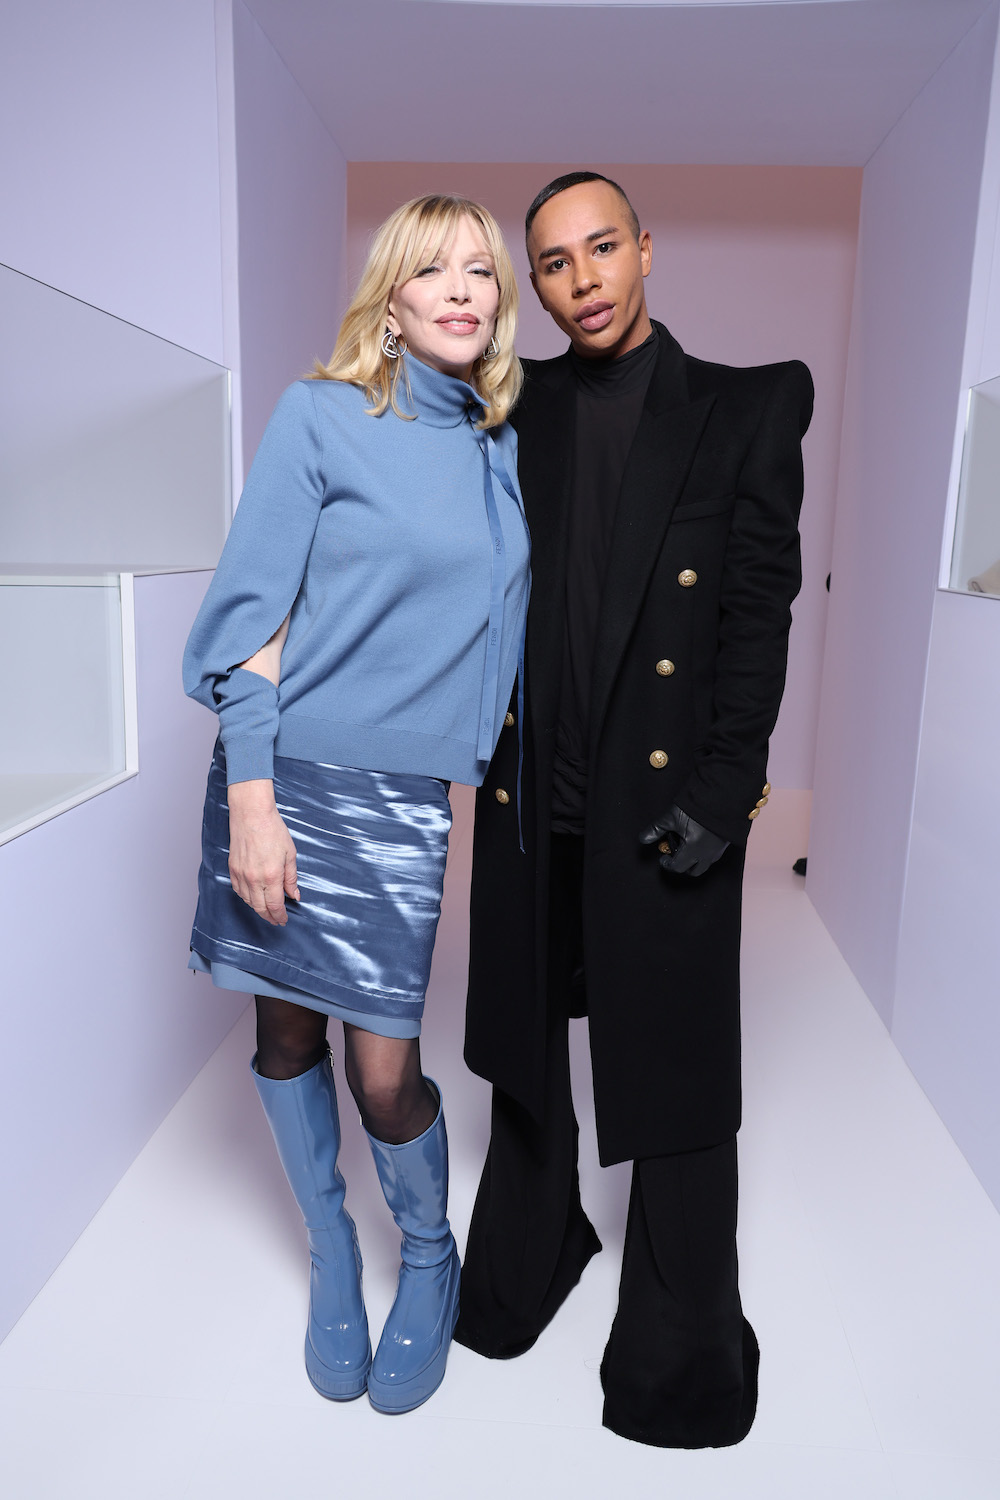 Courtney Love and Olivier Rousteing